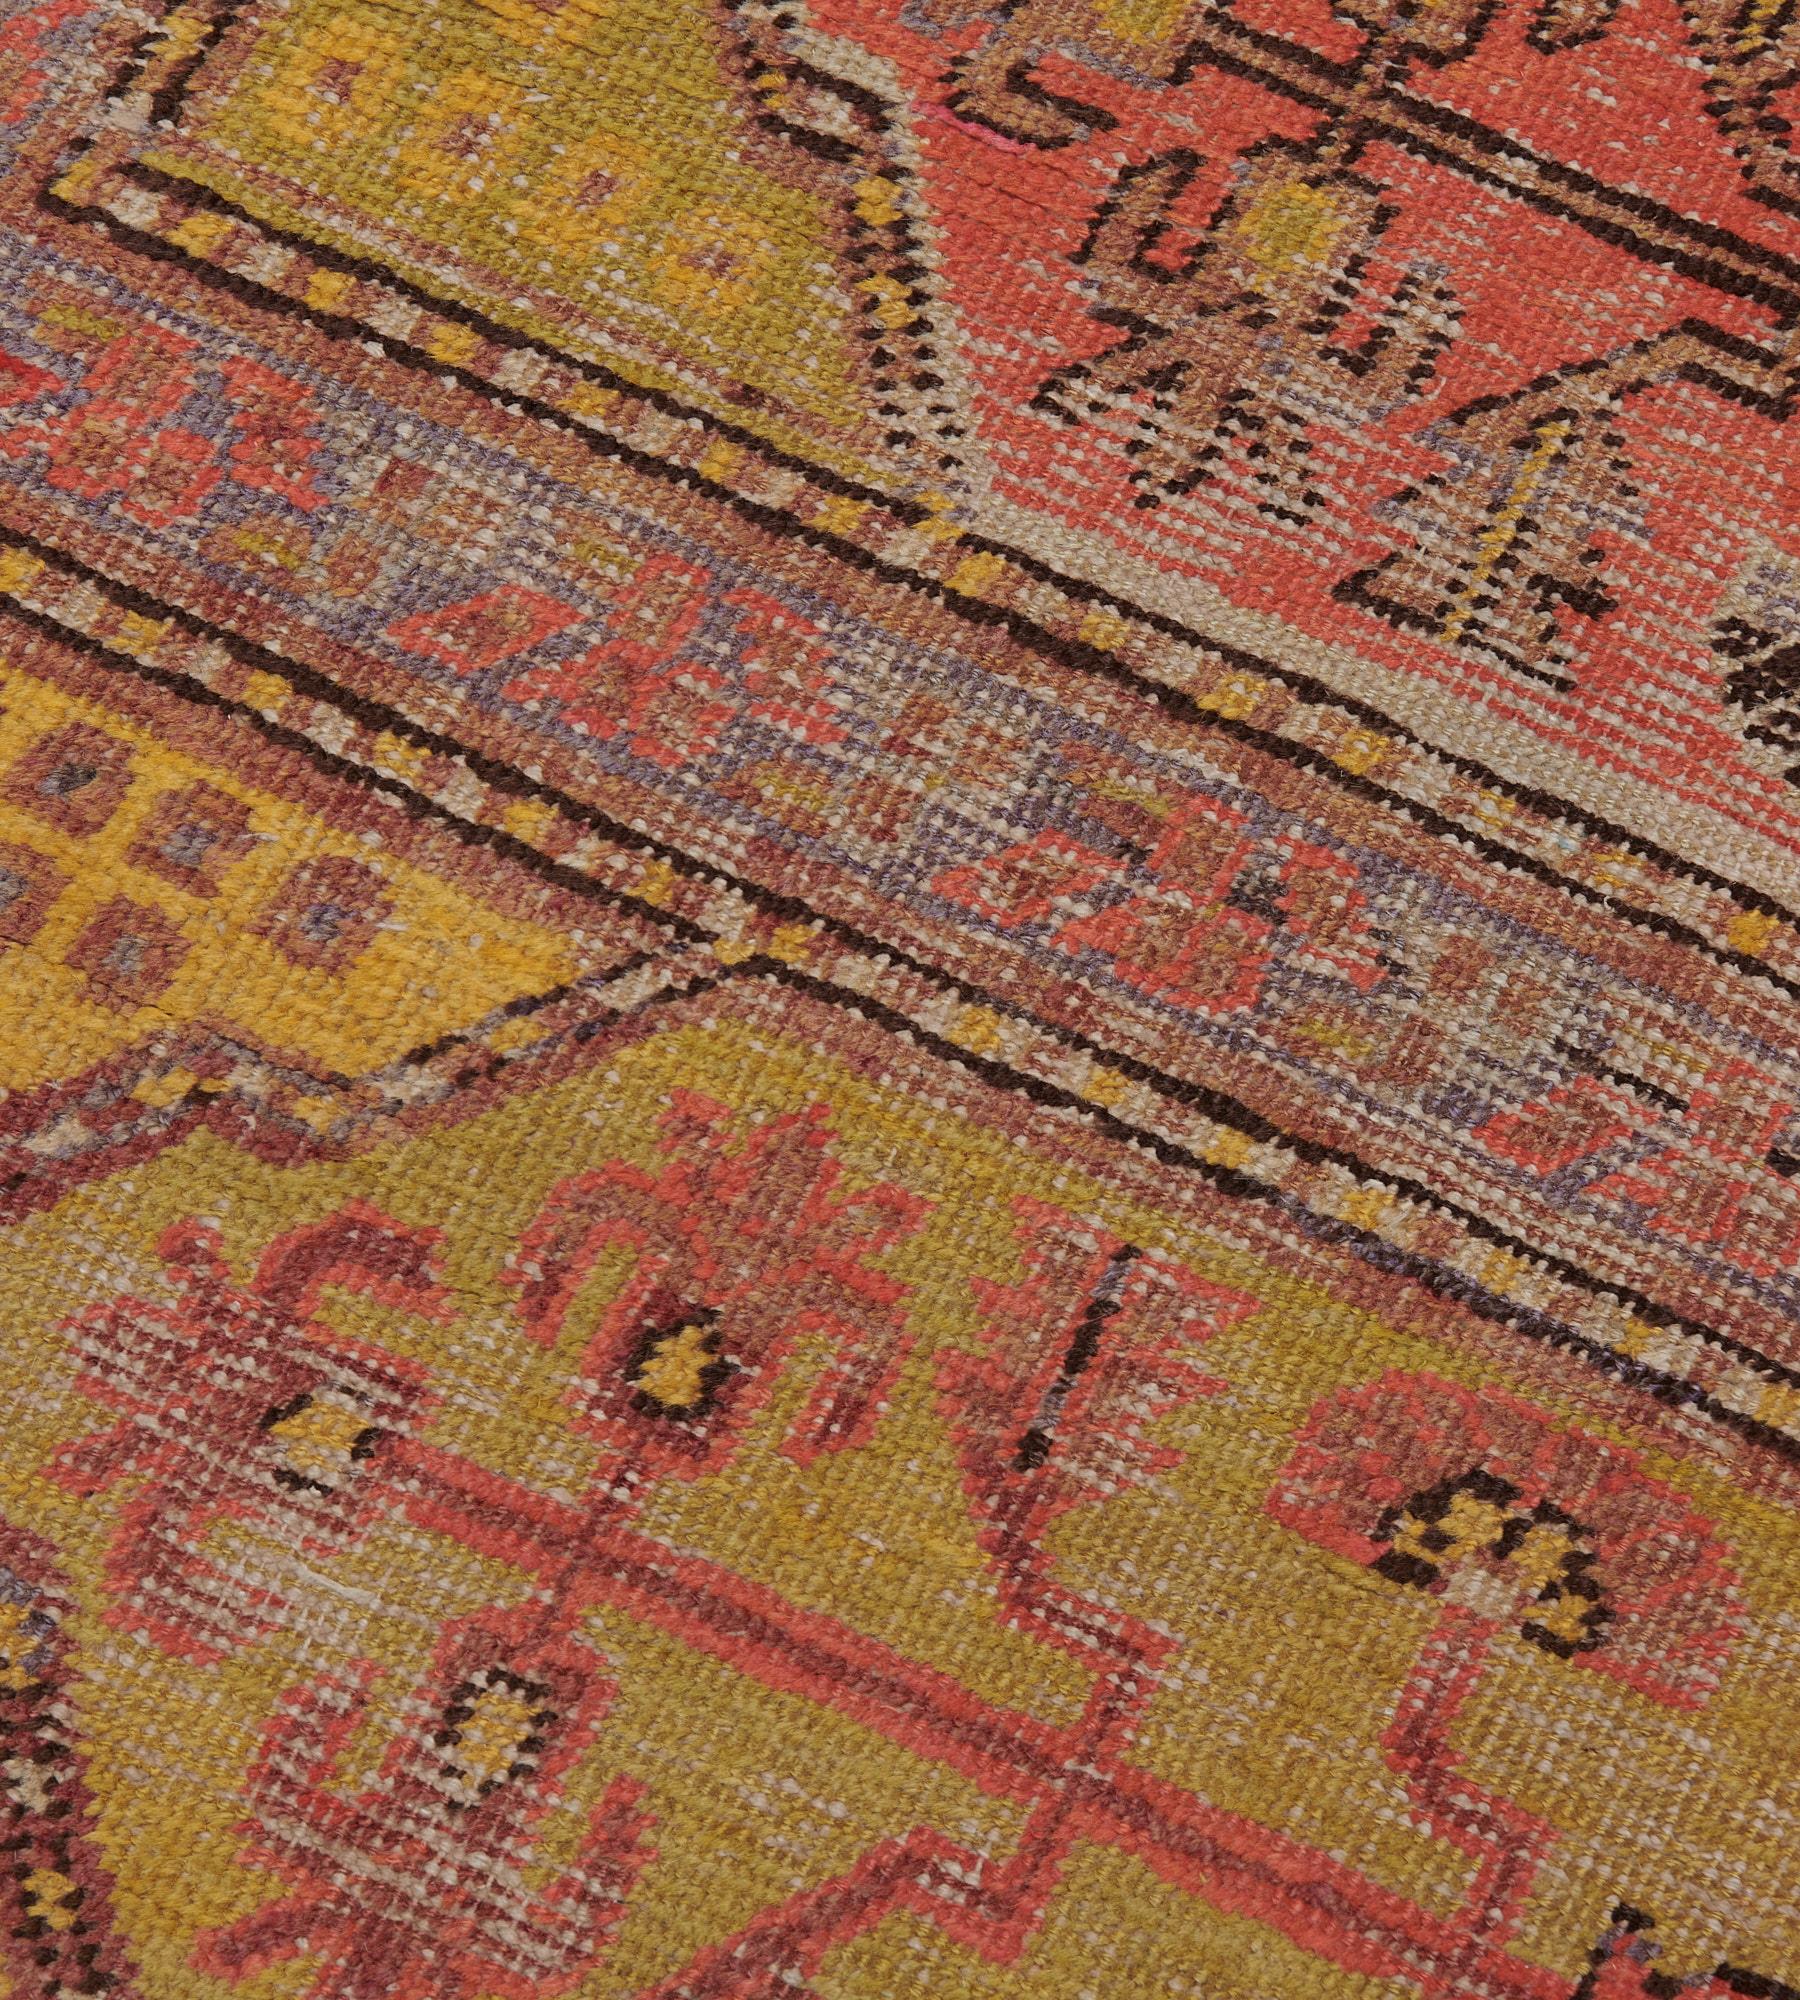 Hand-woven Wool Antique Circa-1900 Traditional Khotan Rug In Good Condition For Sale In West Hollywood, CA